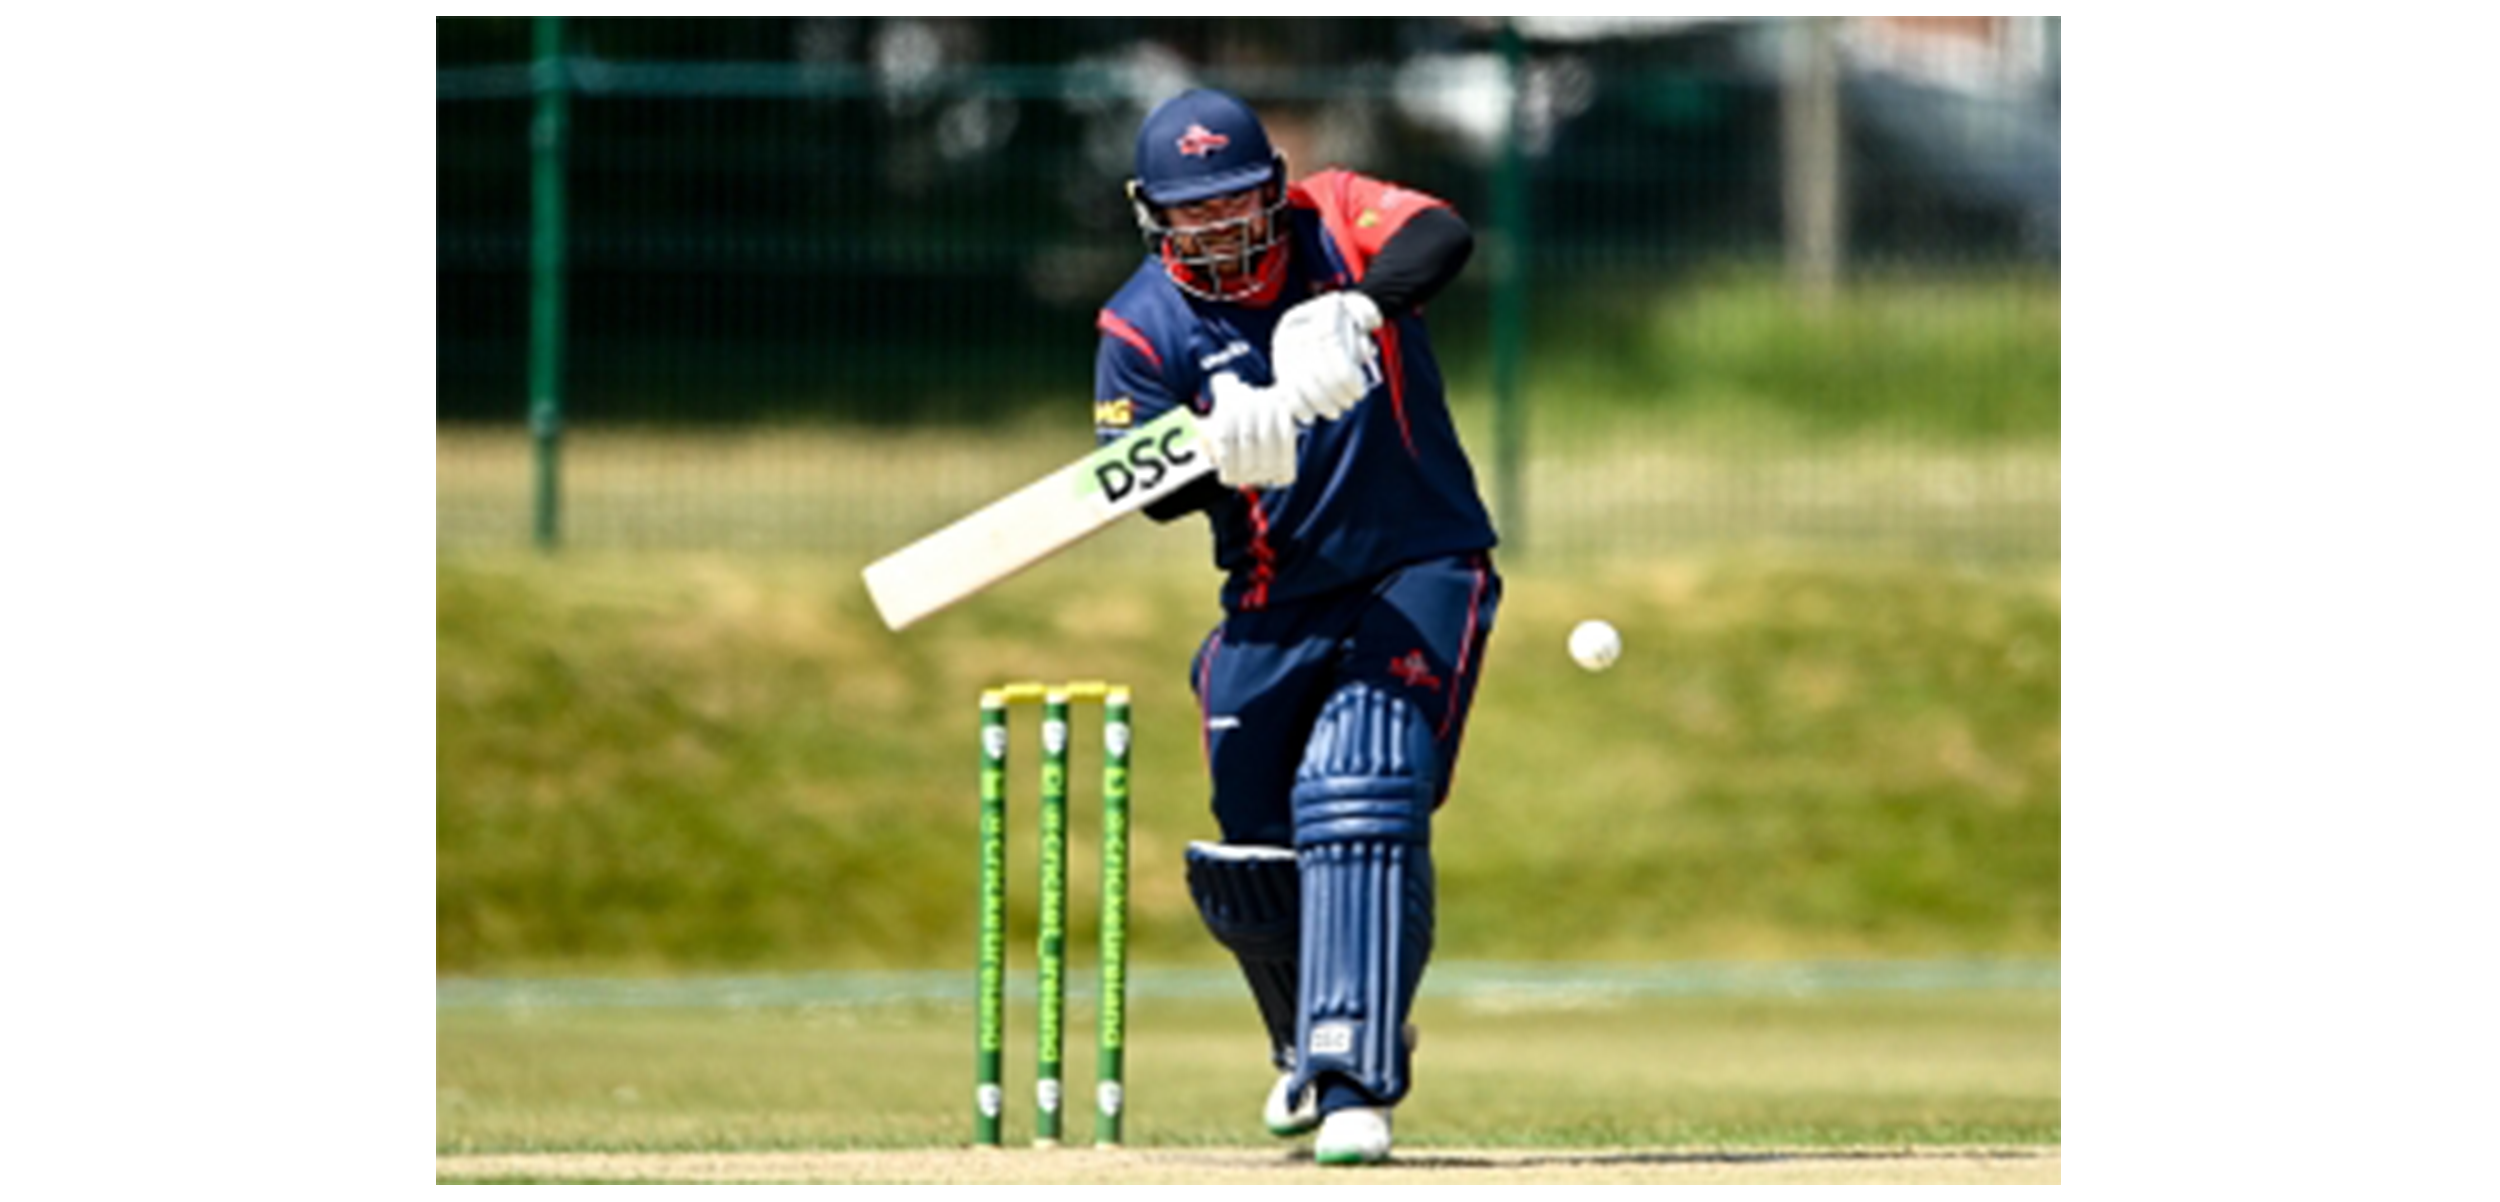 Cricket Ireland: Paul Stirling to play for Middlesex in Vitality Blast